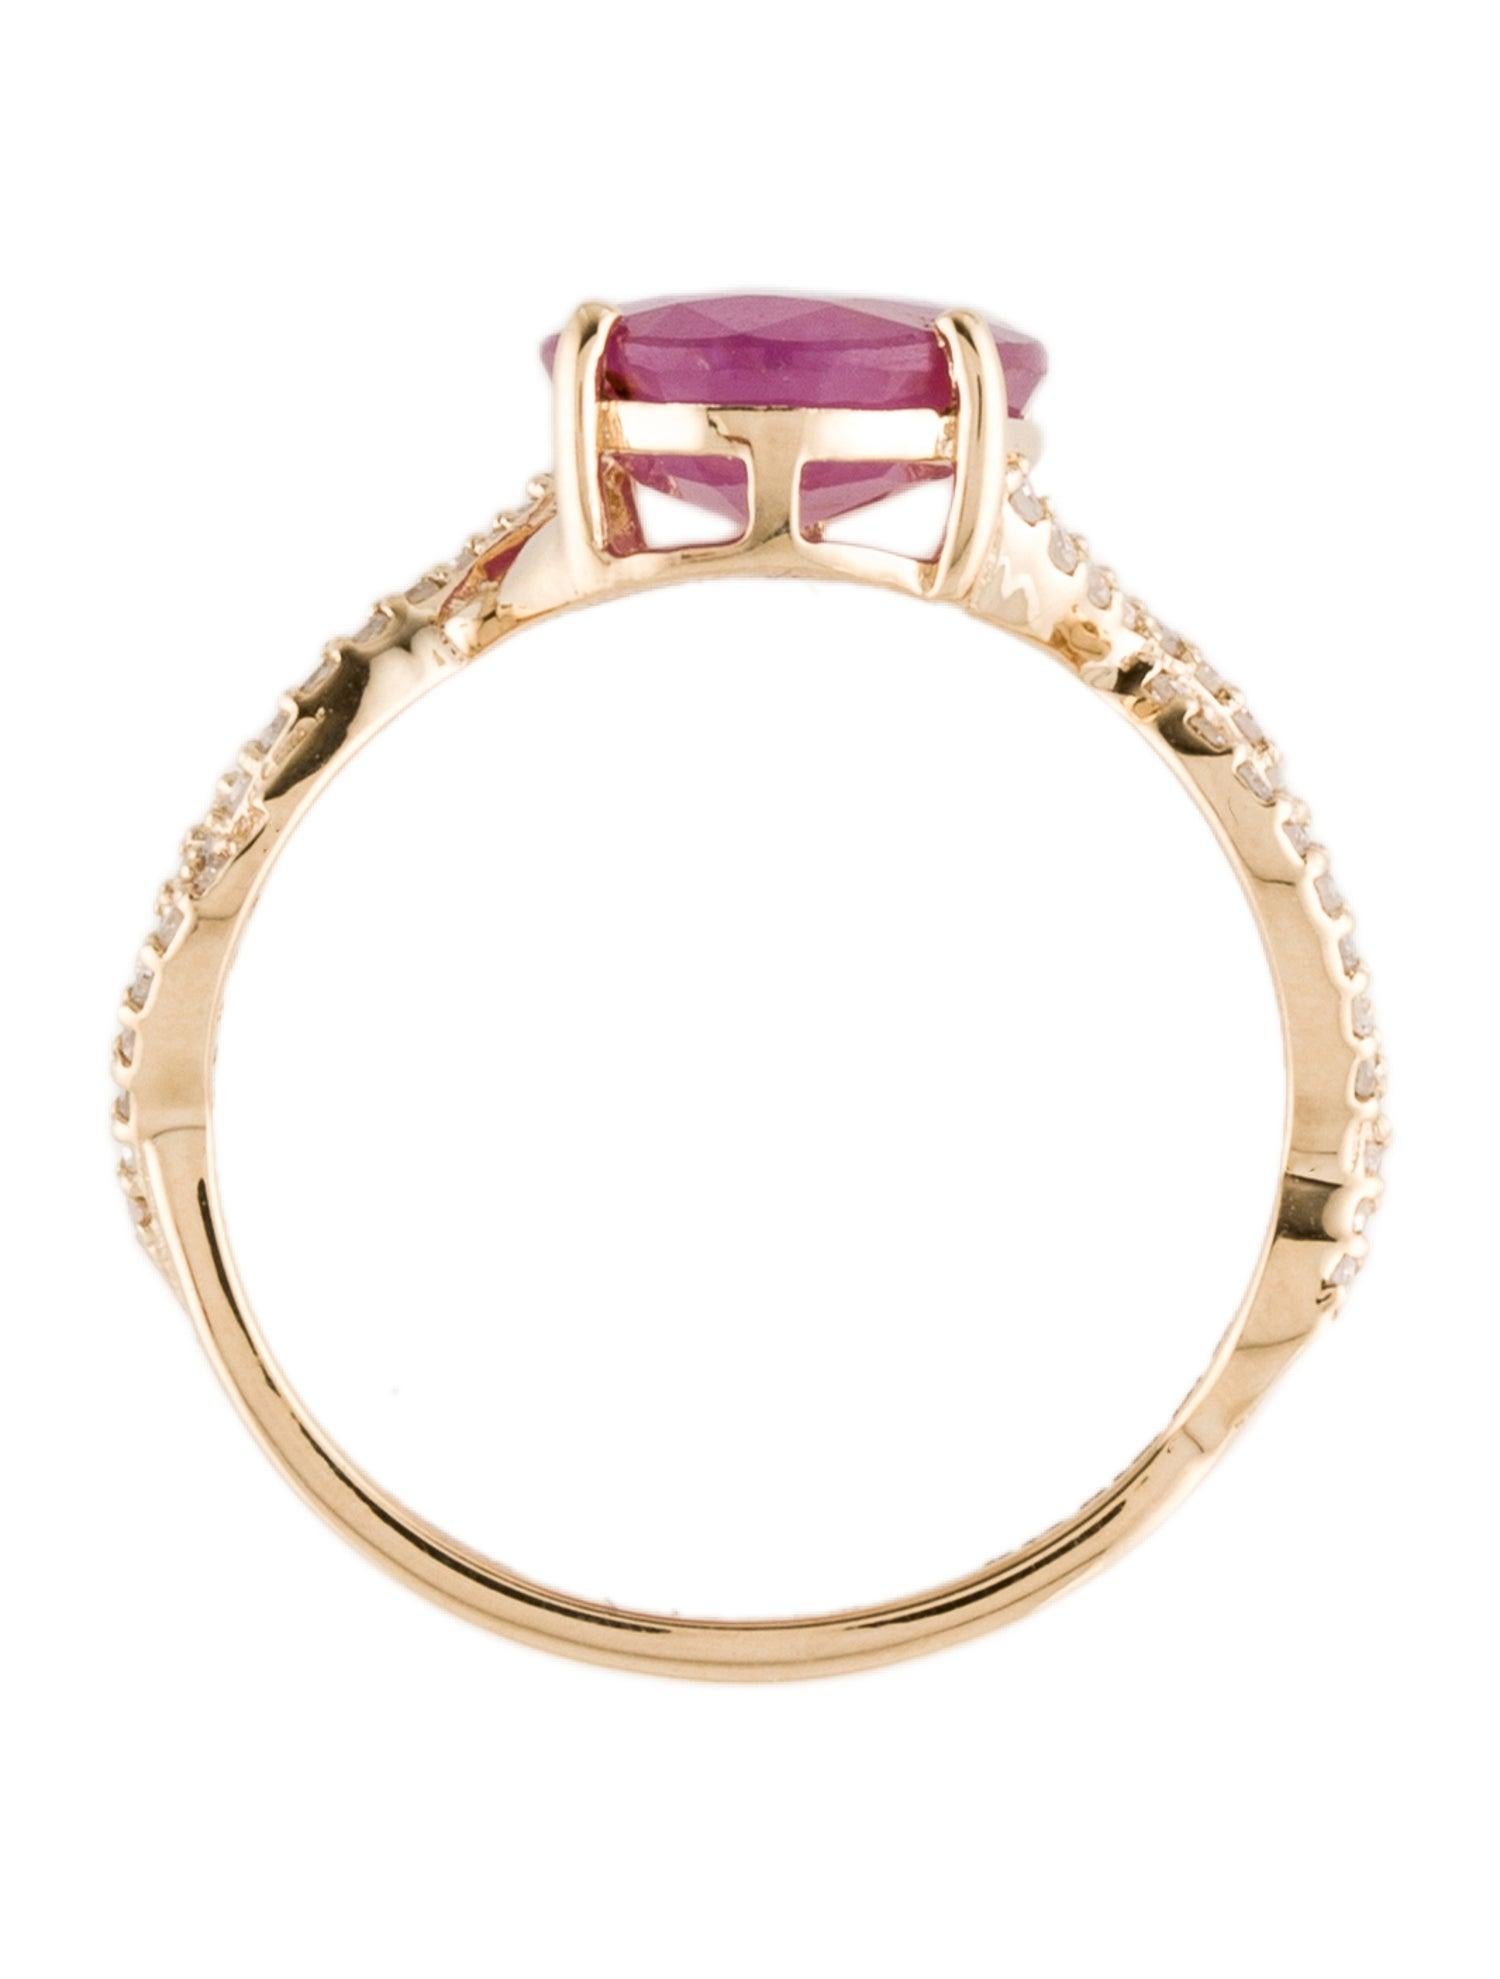 Dazzling 14K Gold 3.29ct Ruby & Diamond Cocktail Ring - Size 7.75 - Fine Jewelry In New Condition For Sale In Holtsville, NY